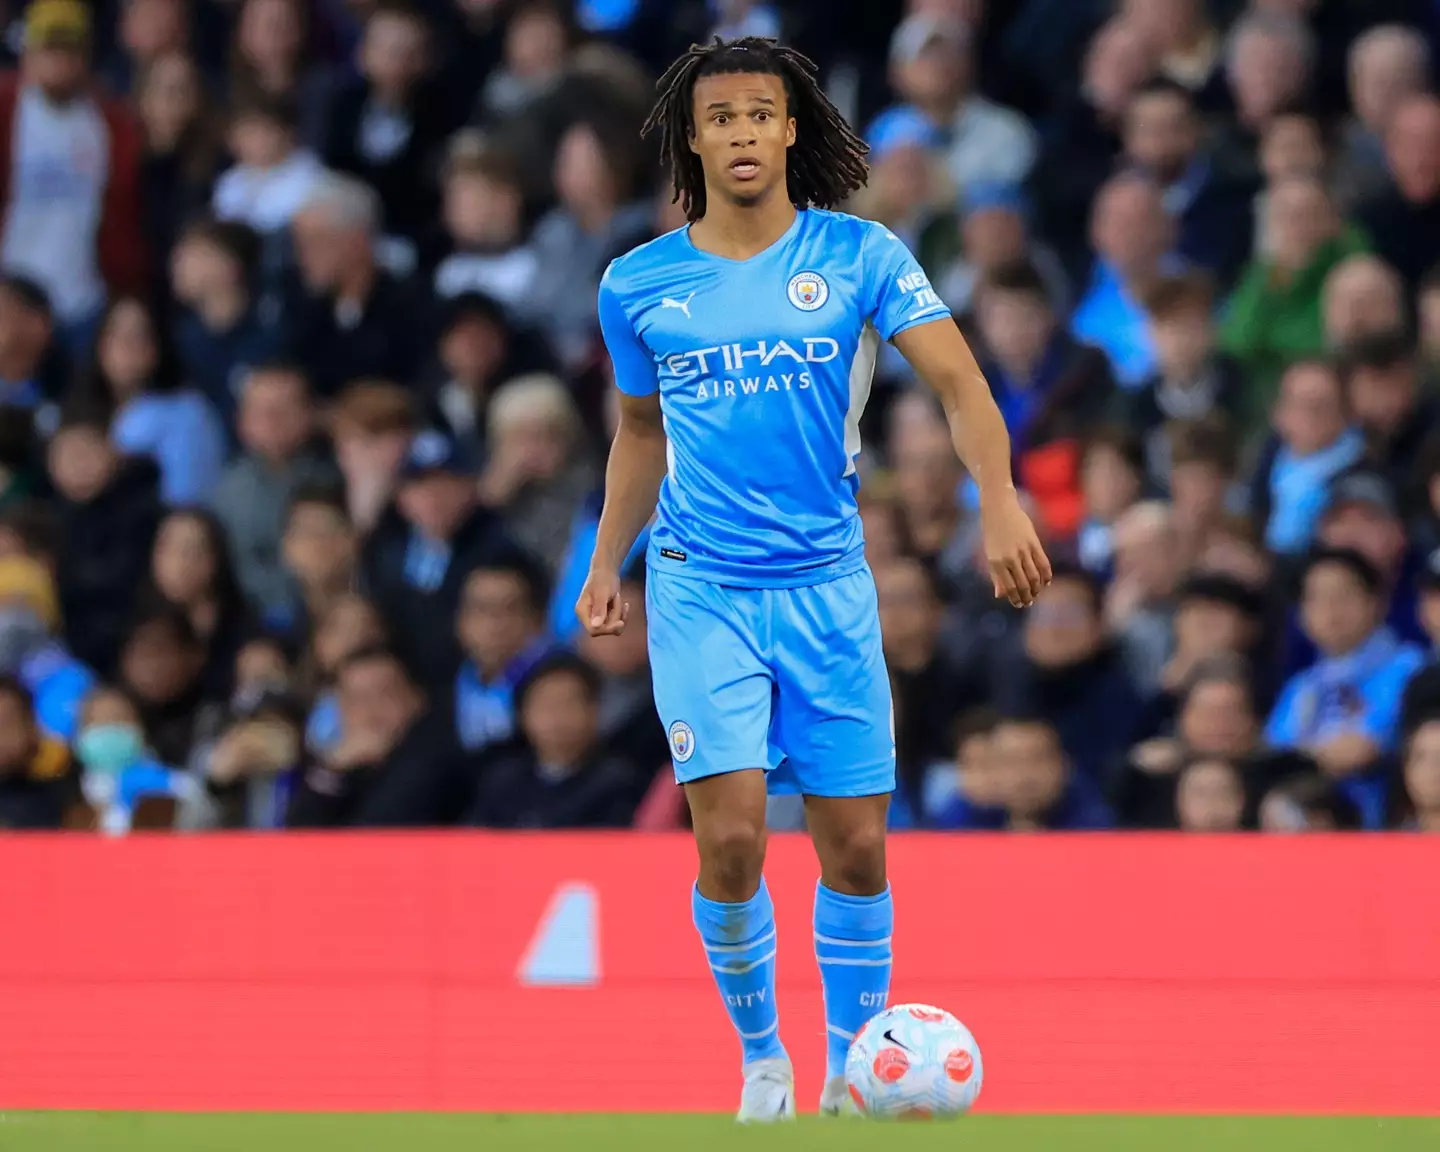 Nathan Ake featuring for Manchester City. (Alamy)